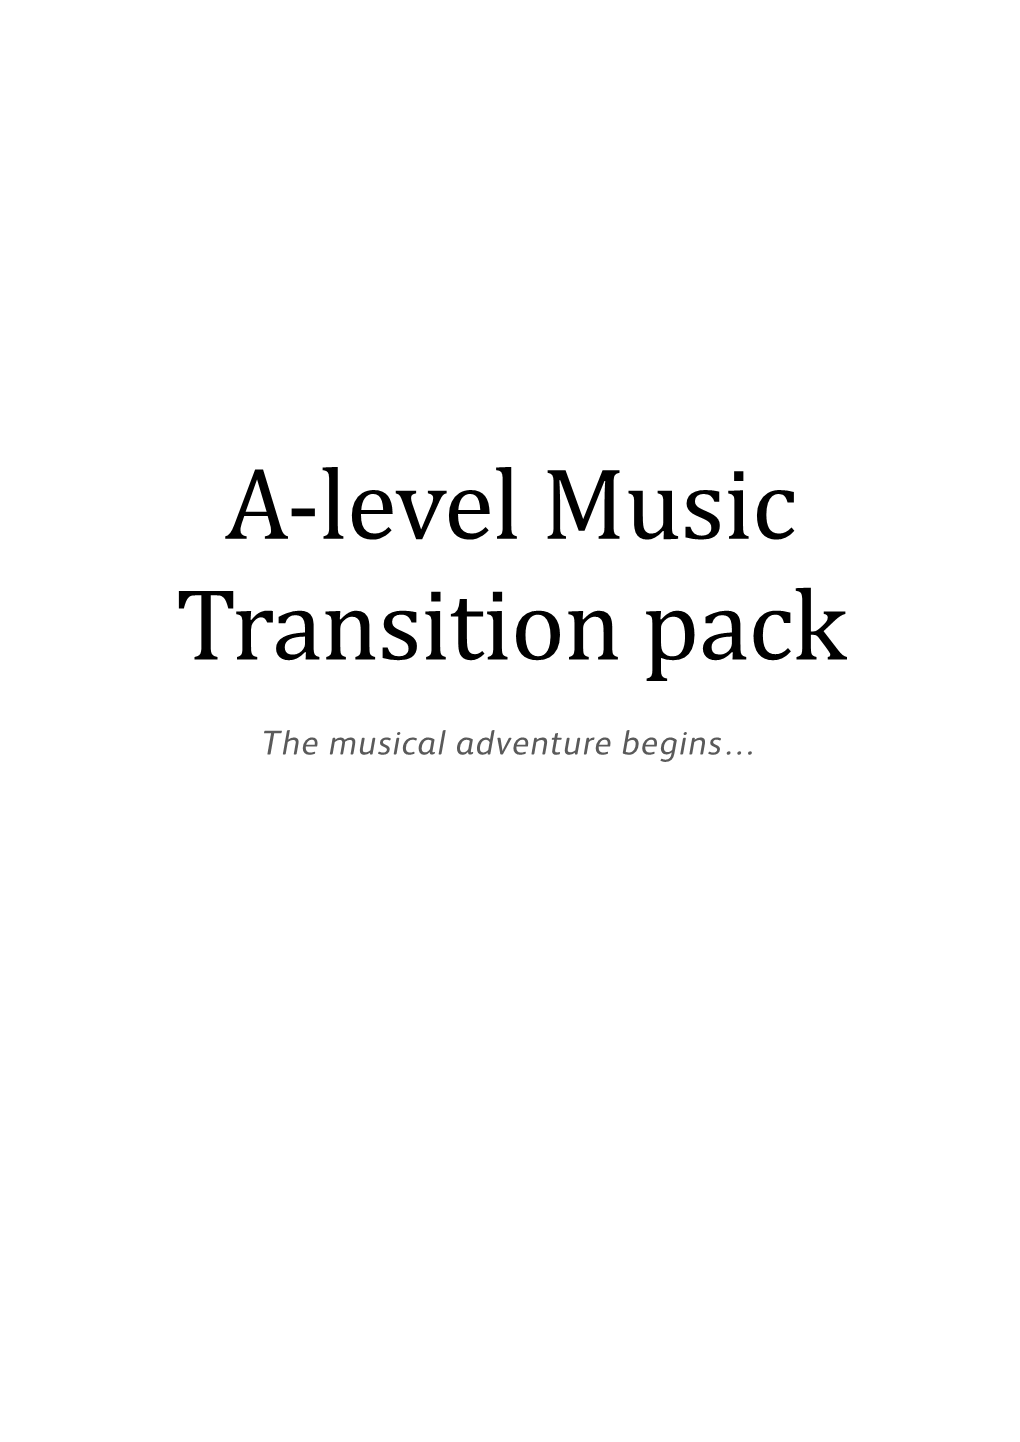 A-Level Music Transition Pack